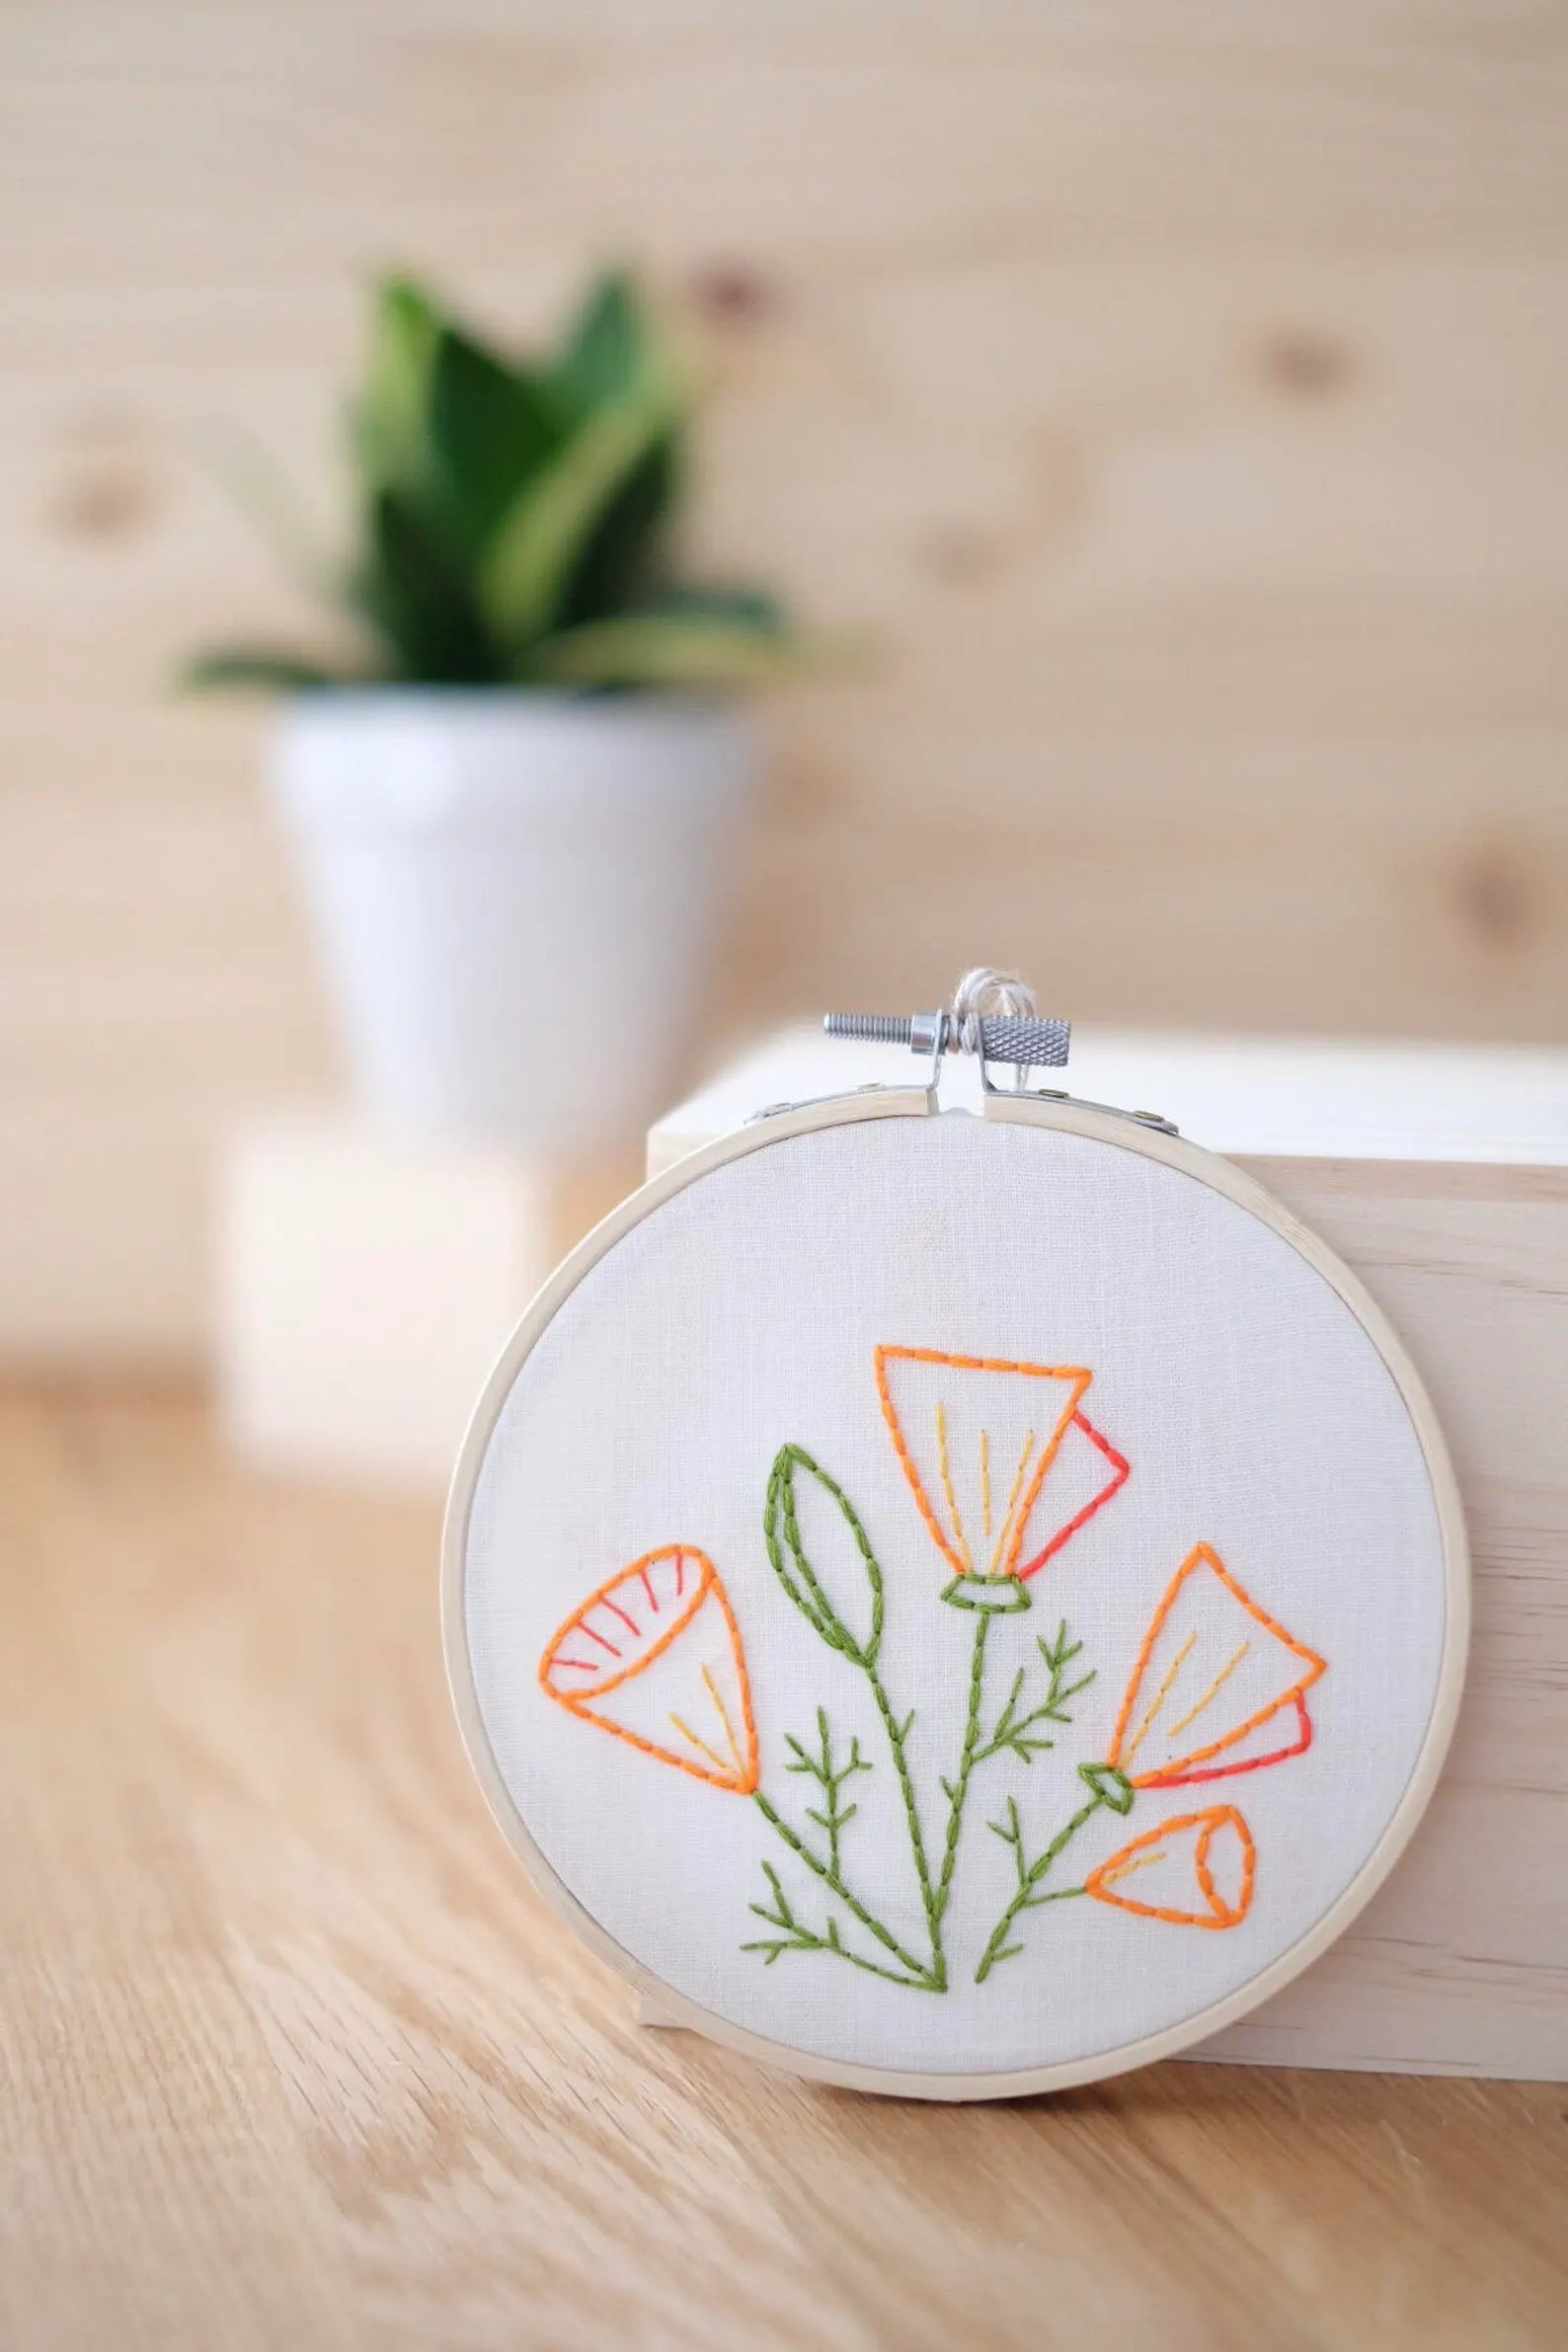 Mommy and Me Embroidery Kit Flower Embroidery Kit DIY Hand